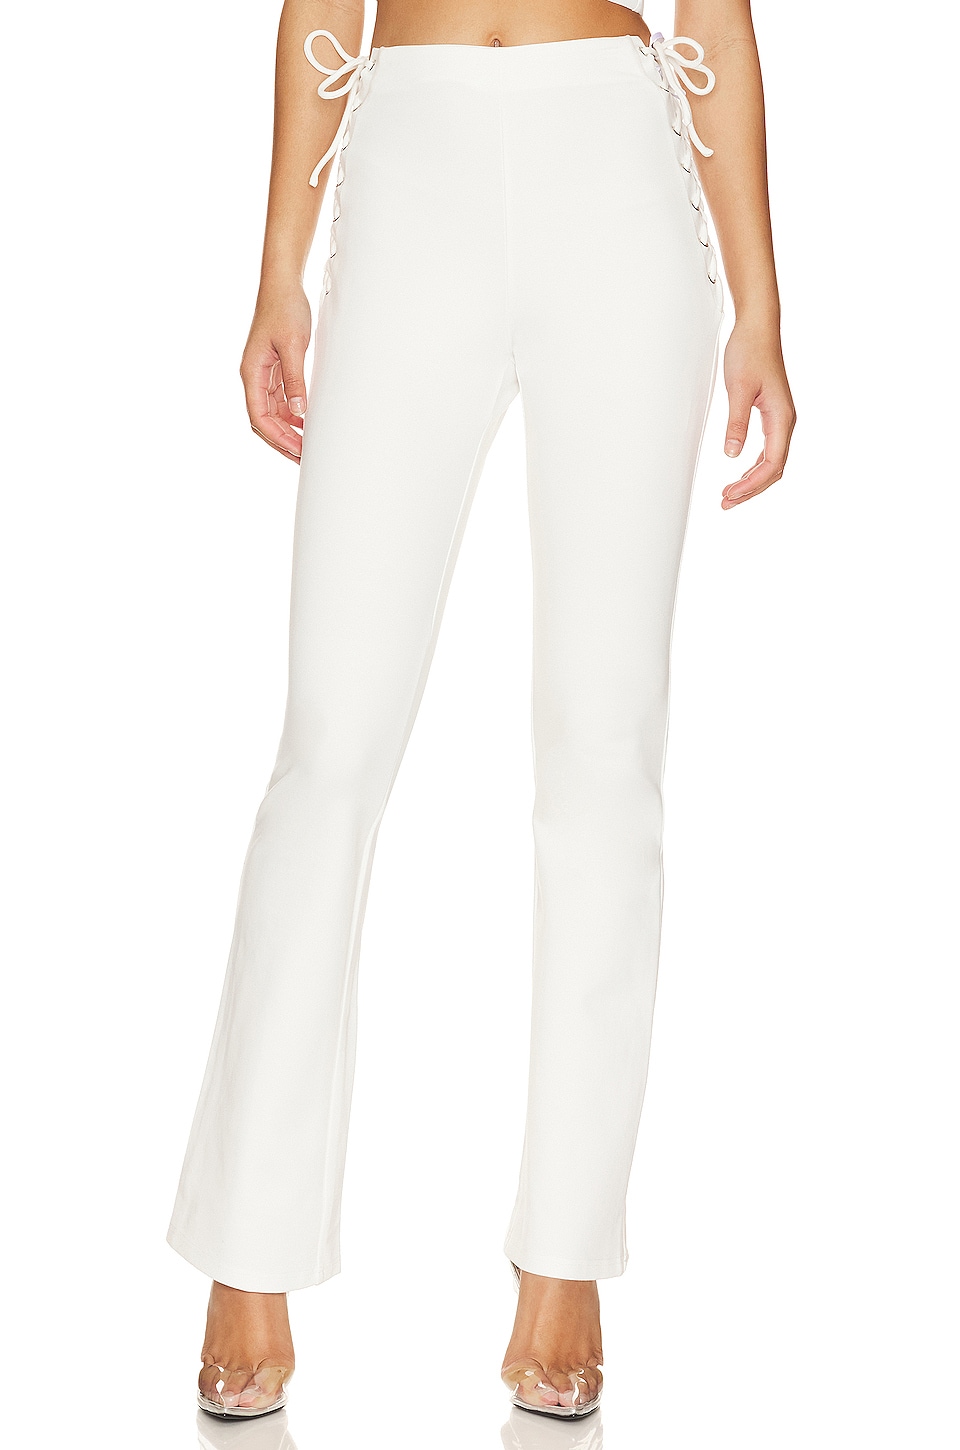 superdown Jeneh Lace Up Pants in ivory | REVOLVE